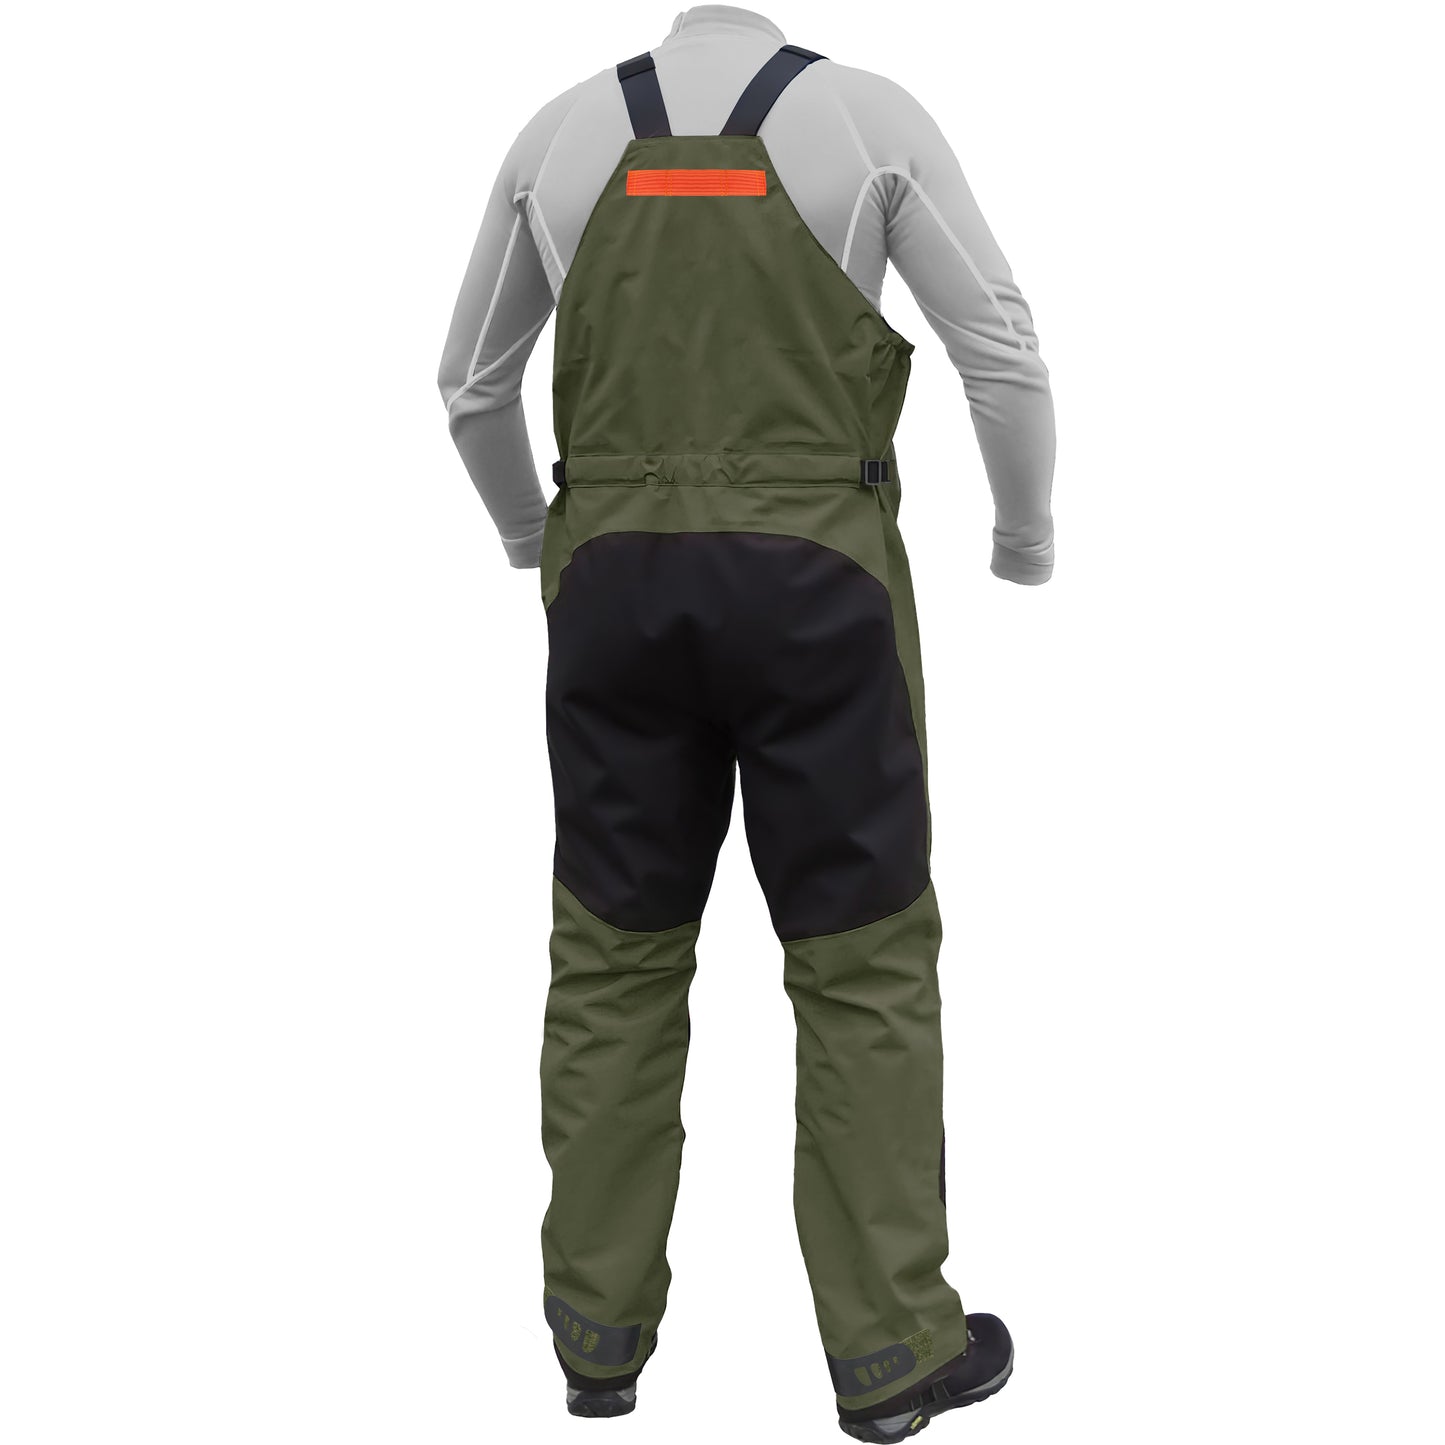 Waterproof Sailing overall/trousers for sail racing and offshore. Back view